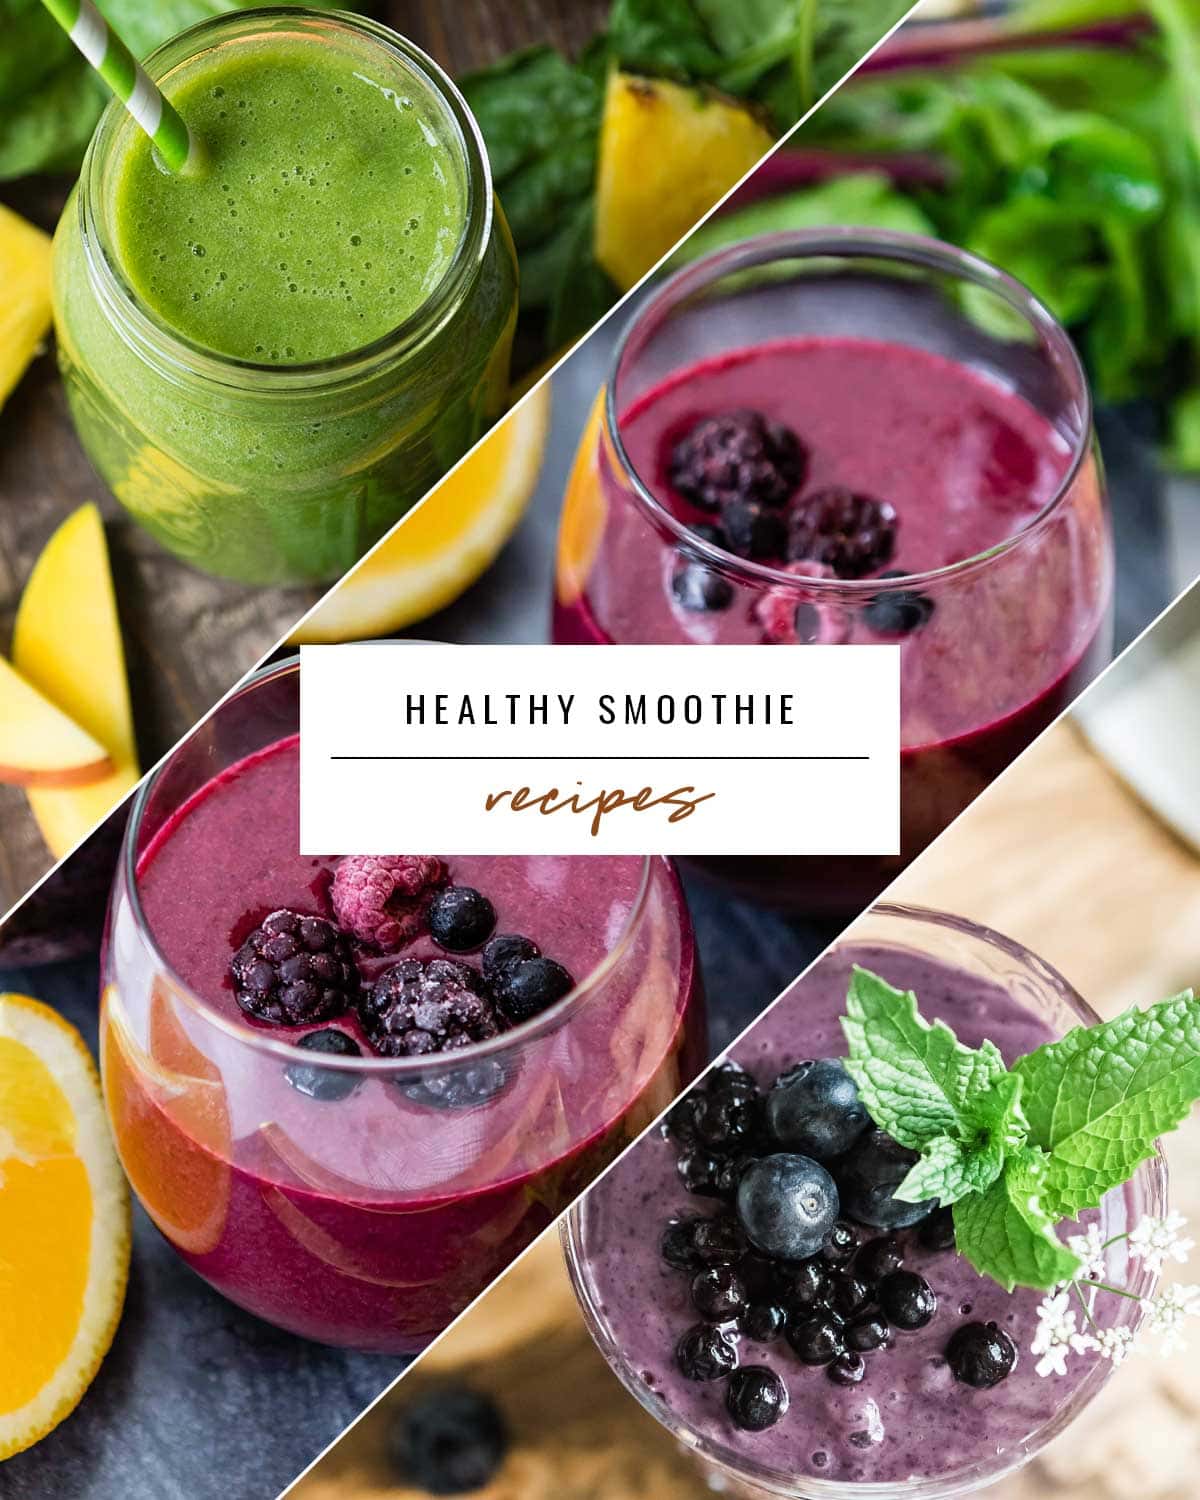 1 green smoothie in a glass jar above 2 purple smoothies topped with frozen fruit on top of 1 purple smoothie with blueberries and fresh mint leaves. the words Healthy Smoothie Recipes in a white box sit in the middle